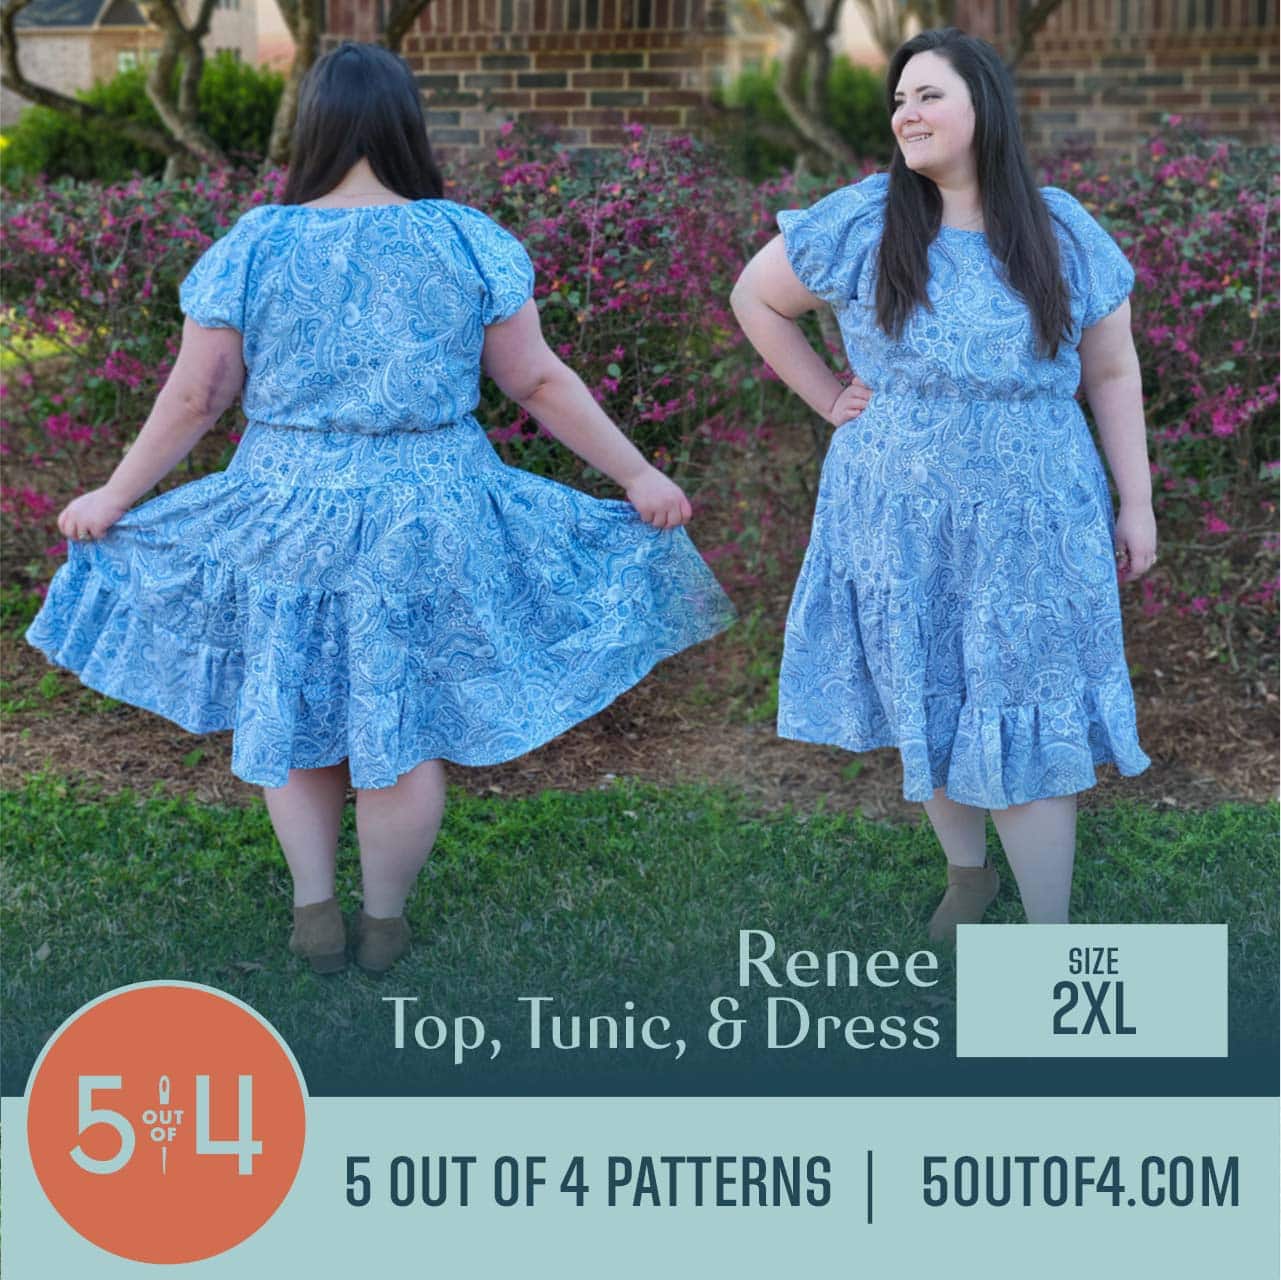 Renee Top, Tunic, and Dress - 5 out of 4 Patterns